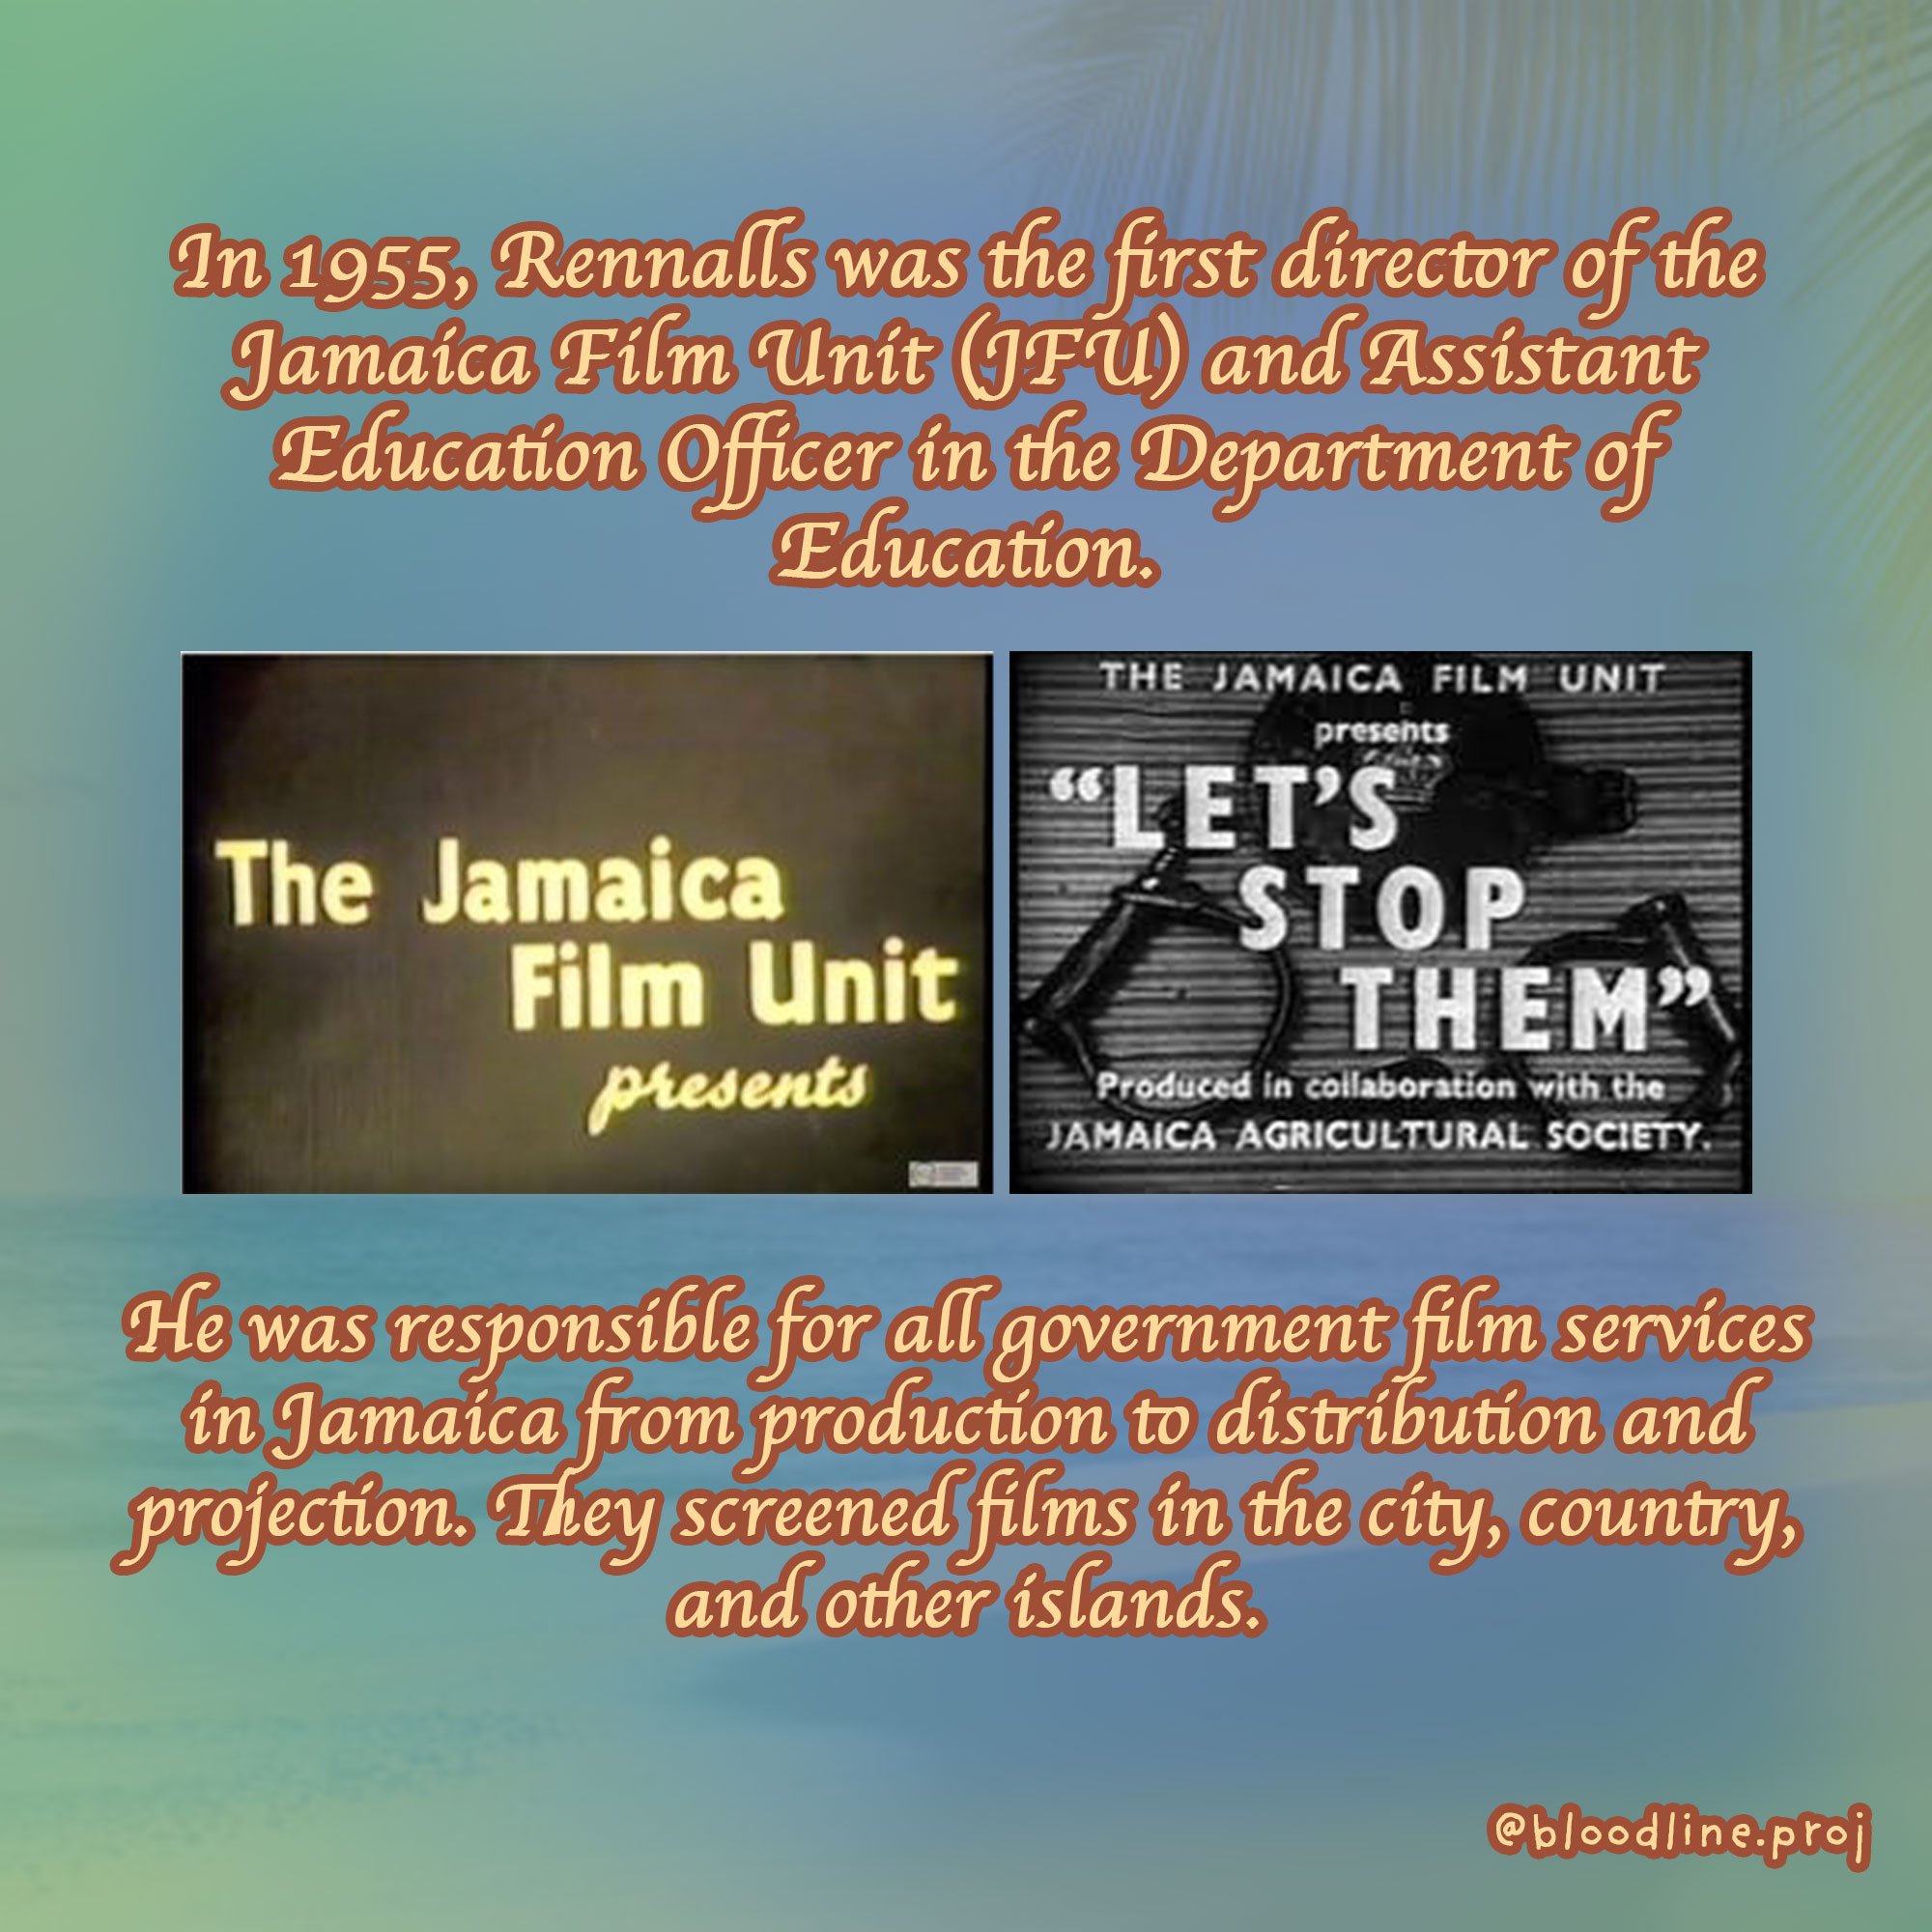  In 1955, Rennalls was the first director of the Jamaica Film Unit (JFU) and Assistant Education Officer in the Department of Education.  He was responsible for all government film services in Jamaica from production to distribution and projection. T